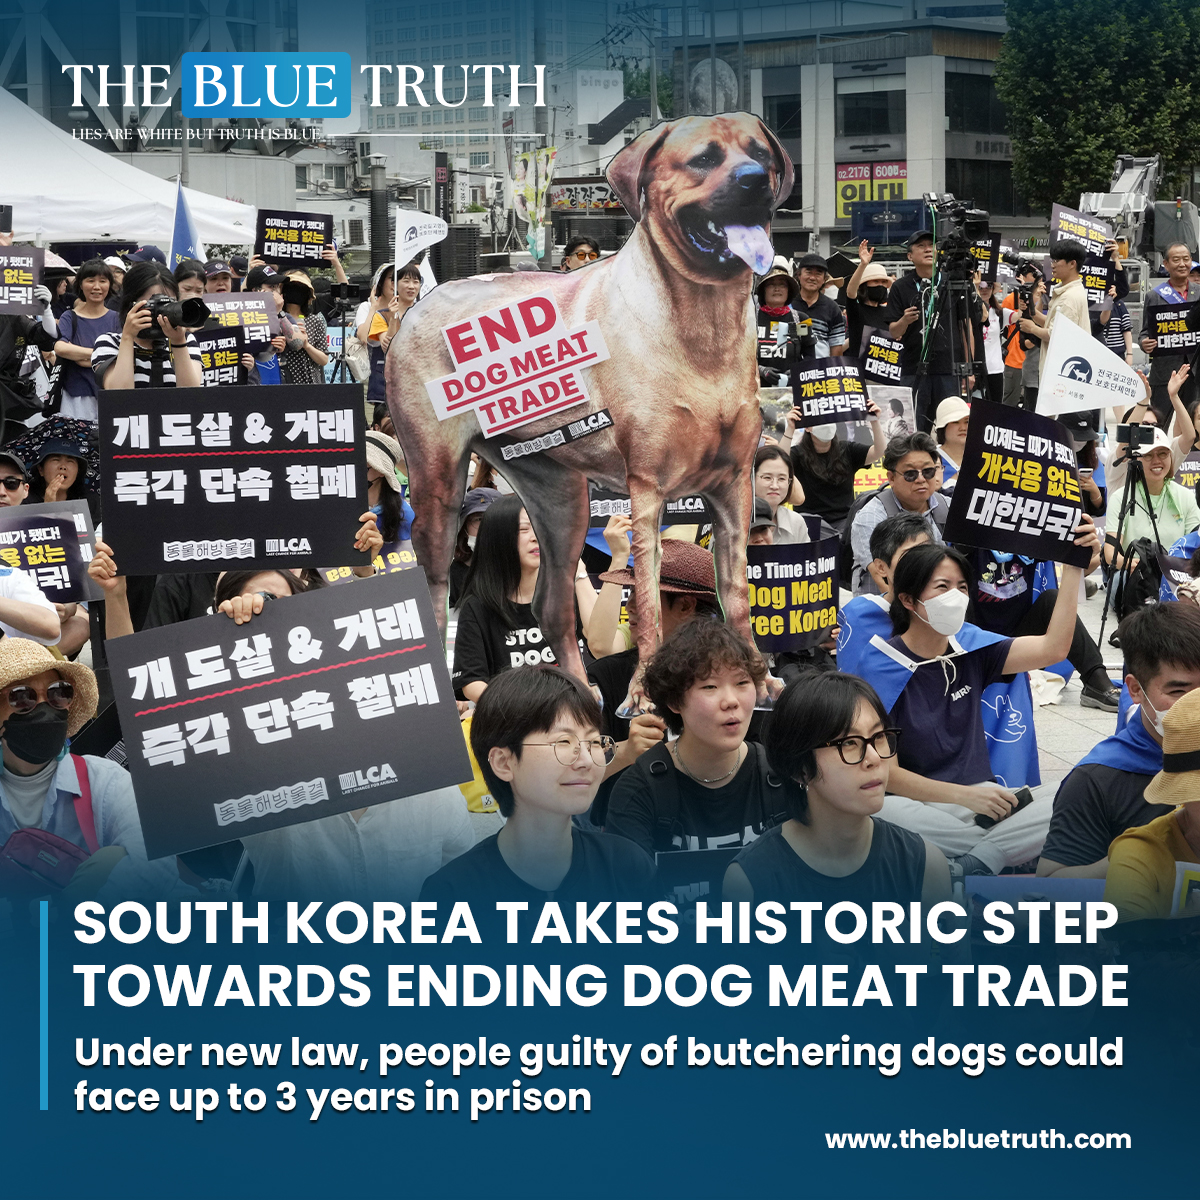 South Korea Takes Historic Step Towards Ending Dog Meat Trade.
Under new law, people guilty of butchering dogs could face up to 3 years in prison.
#EndDogMeatTrade #SouthKoreaAnimalRights #HistoricDecision
#AnimalWelfare #DogsDeserveBetter #KoreaAgainstDogMeat #tbt #TheBlueTruth